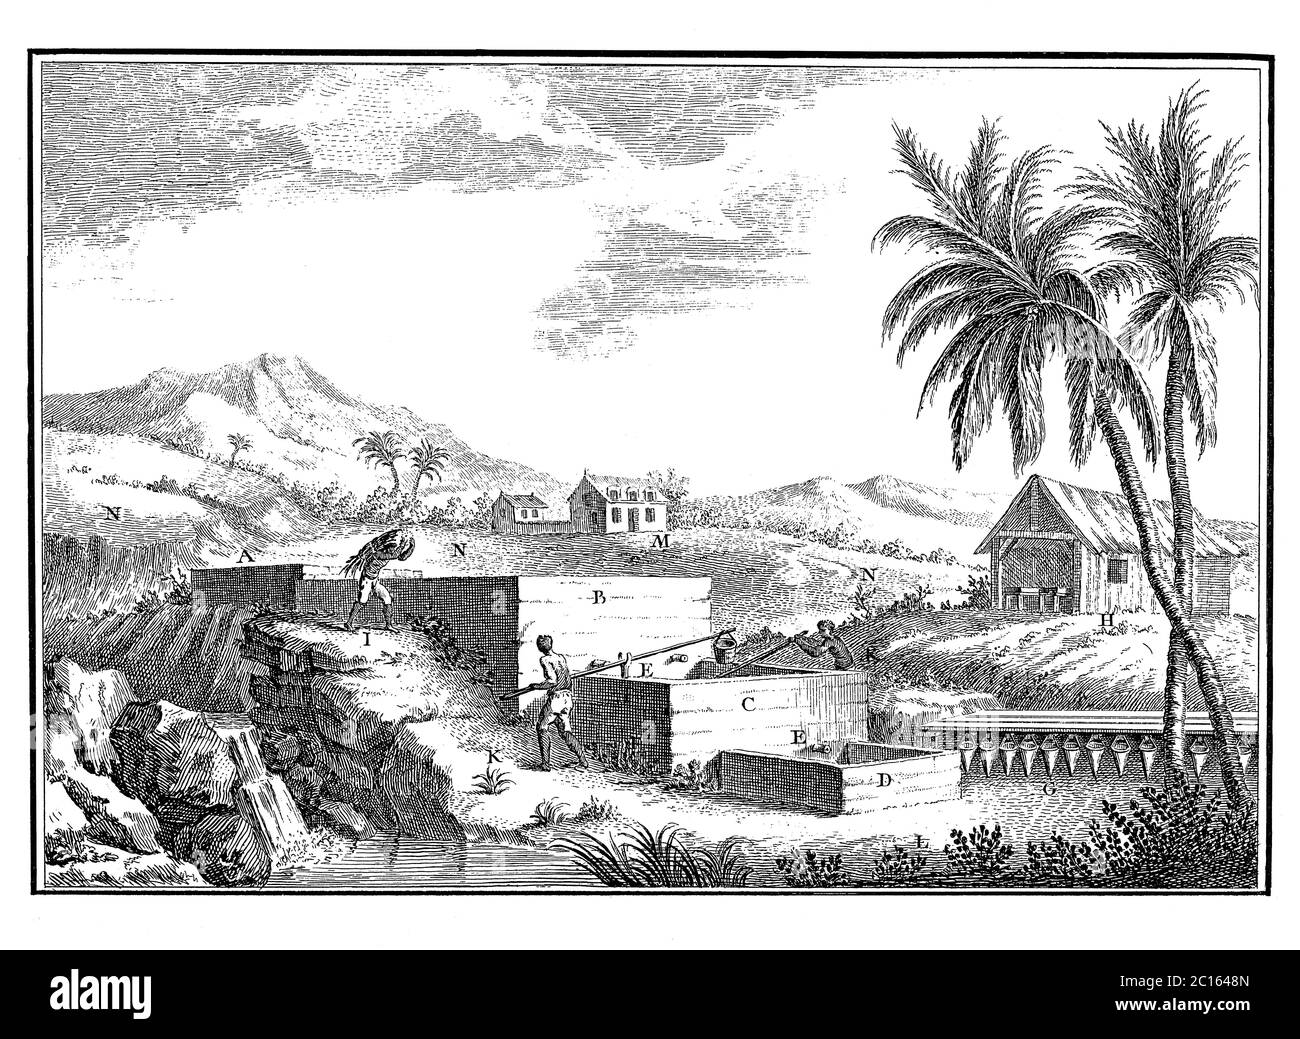 18th century illustration of an indigo plantation in West Indies. Published in 'A Diderot Pictorial Encyclopedia of Trades and Industry. Manufacturing Stock Photo